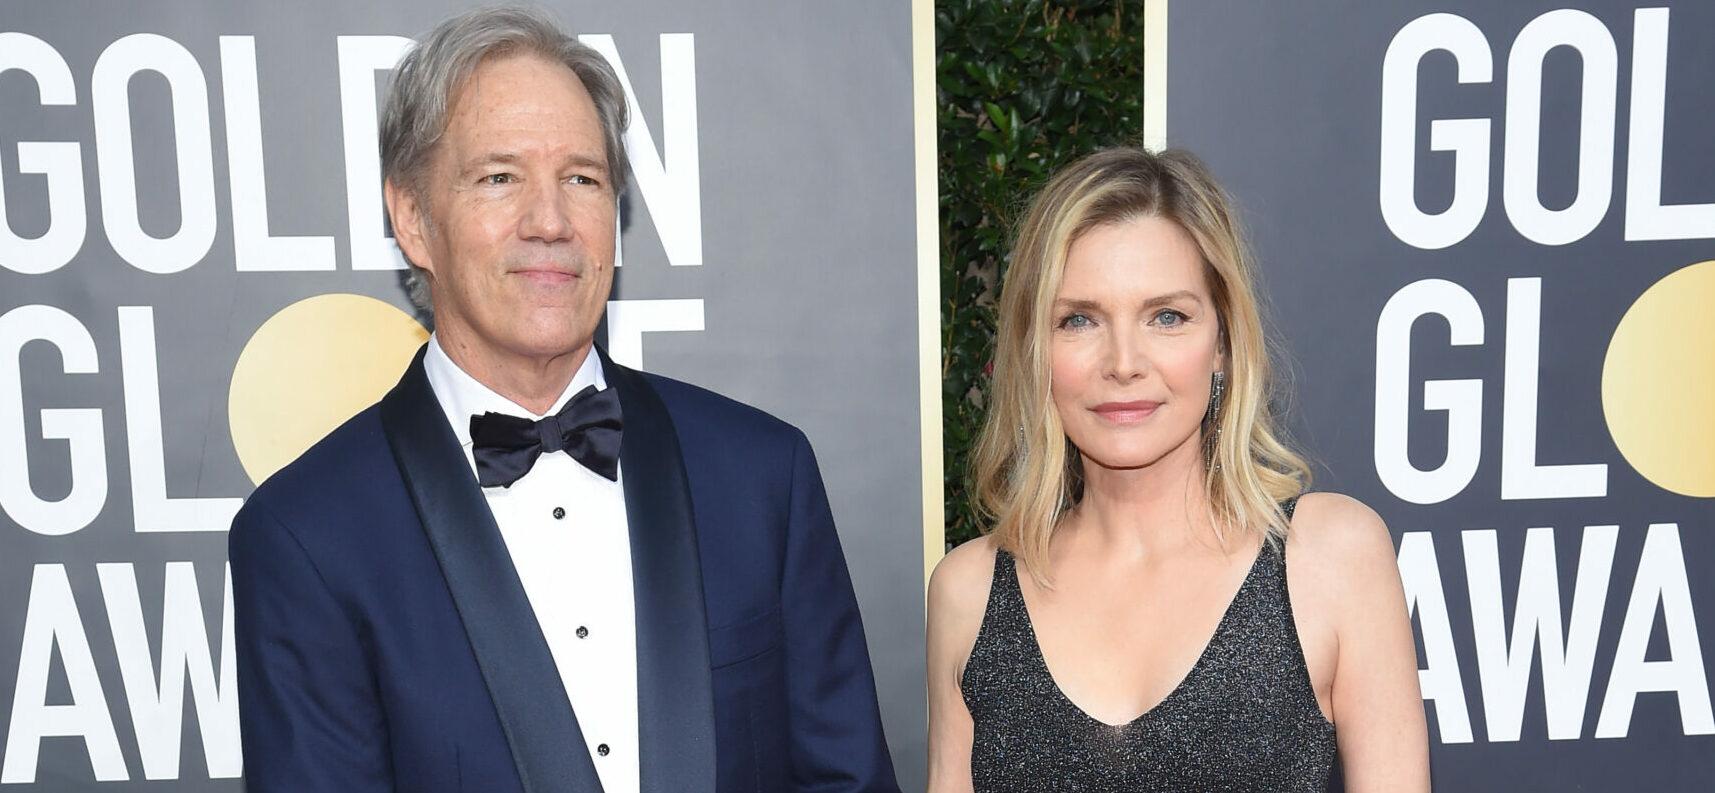 Michelle Pfeiffer and David E. Kelle at the 77th Golden Globe Awards